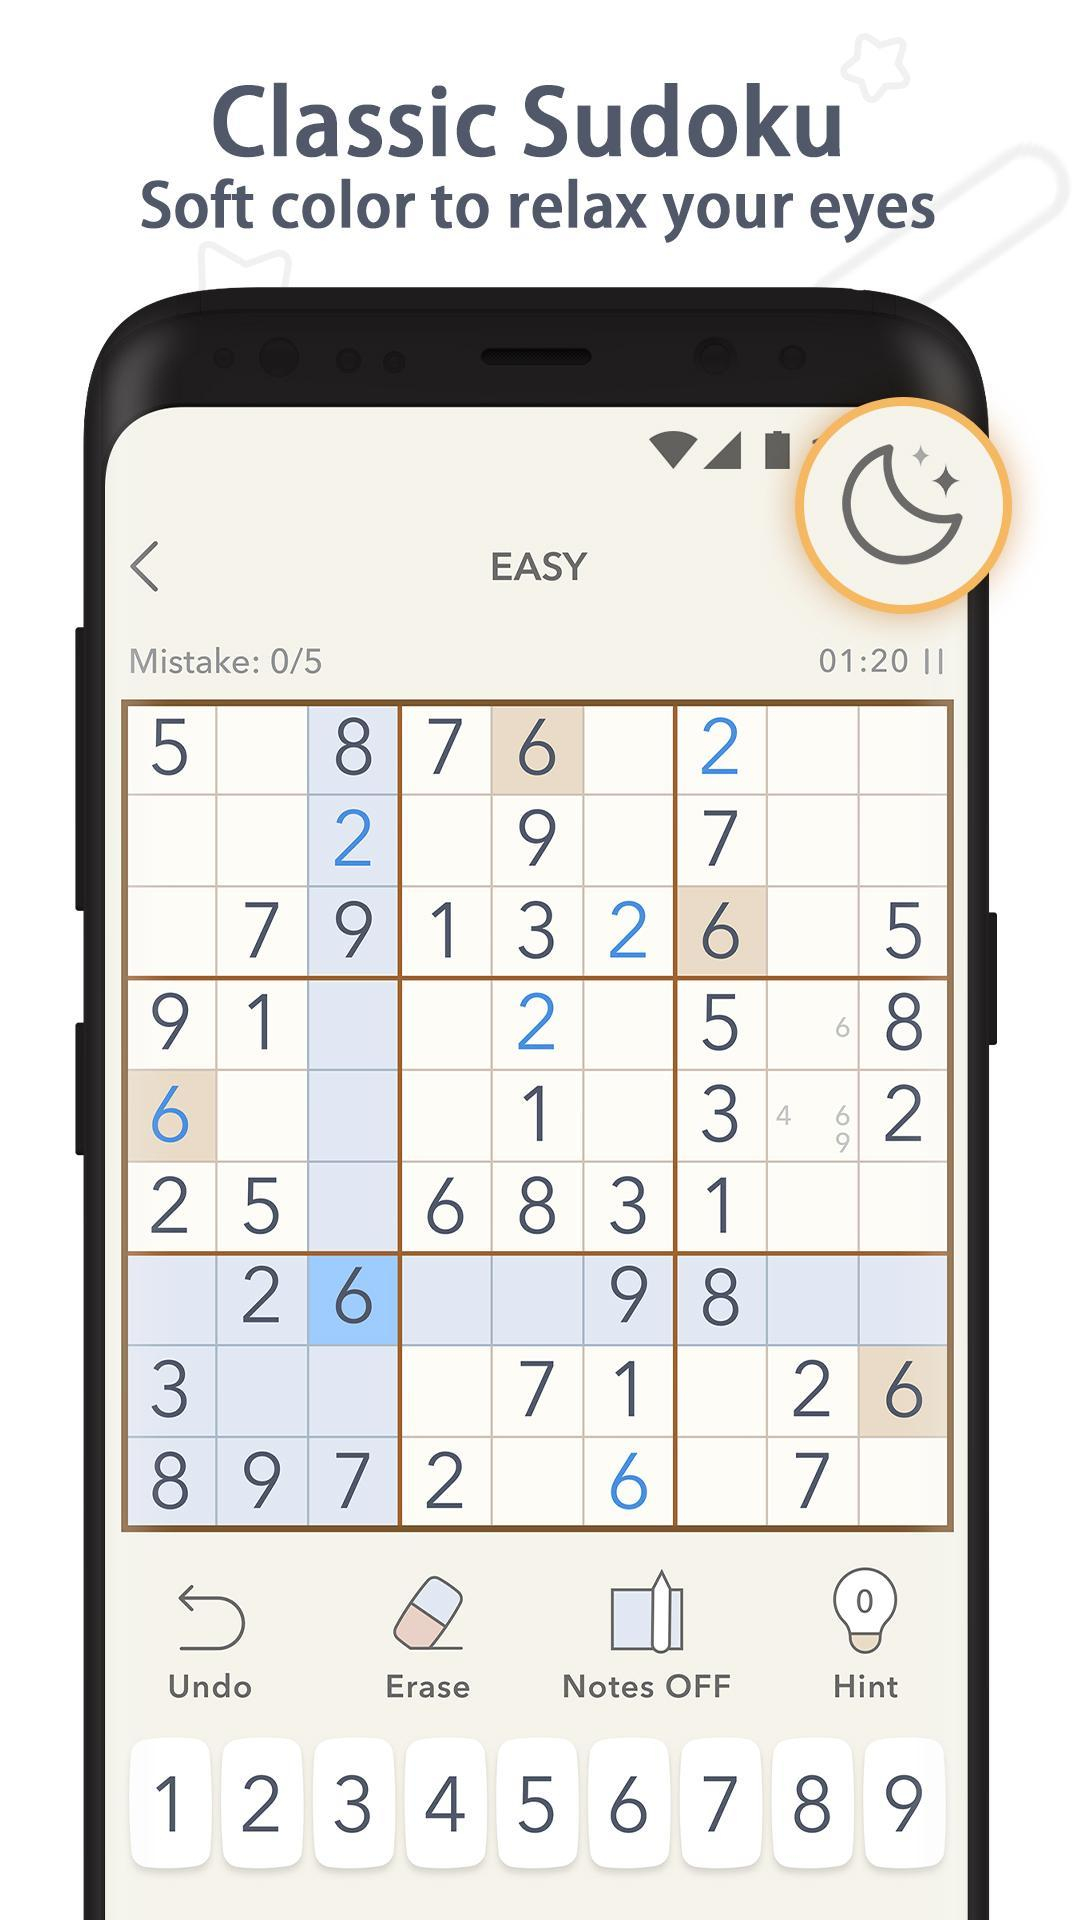 Happy Sudoku - Free Classic Daily Sudoku Puzzles For Android